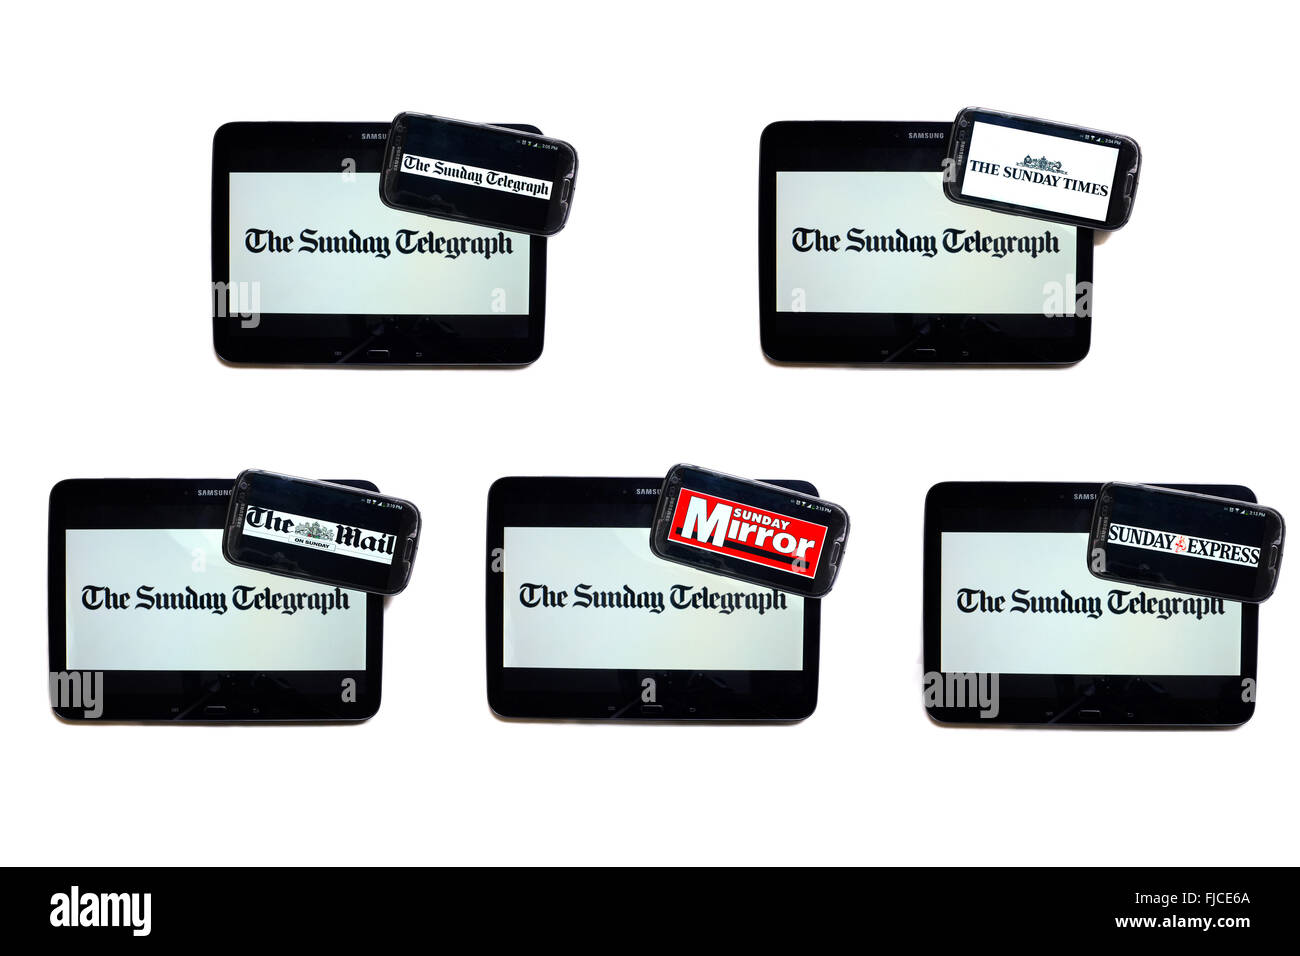 The Sunday Telegraph newspaper logo on tablet screens surrounded by smartphones displaying the logos of rival newspapers. Stock Photo